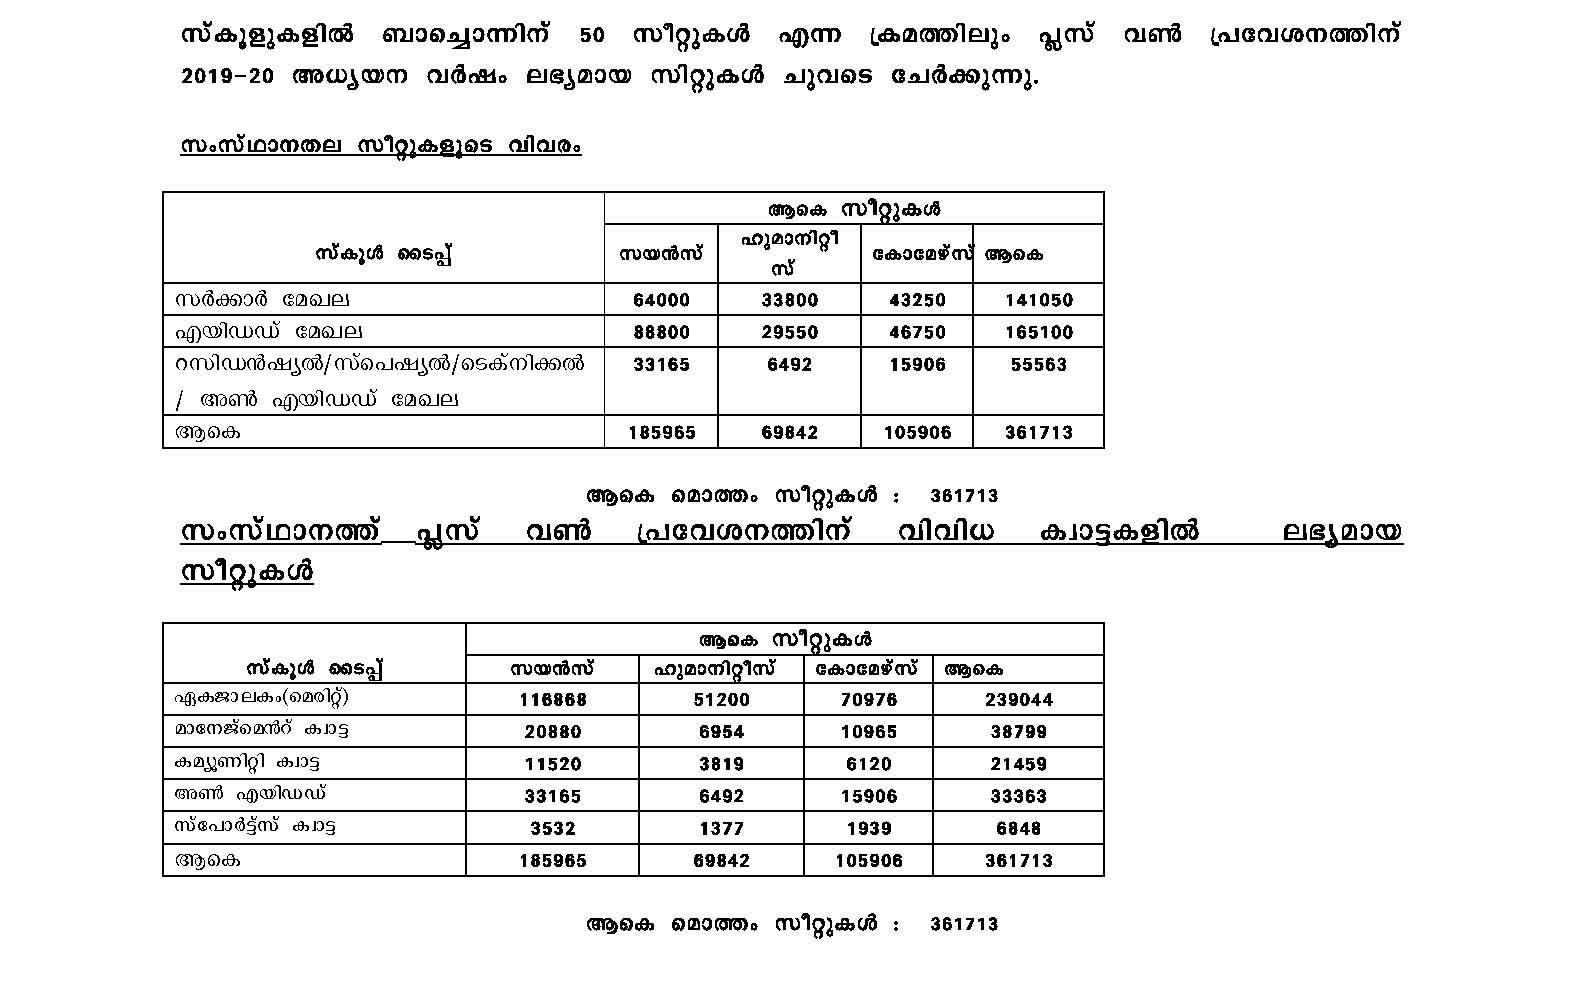 Plus 1 Seat Availability in Schools of Kerala for 2018 2019 Batch - Notification Image 2